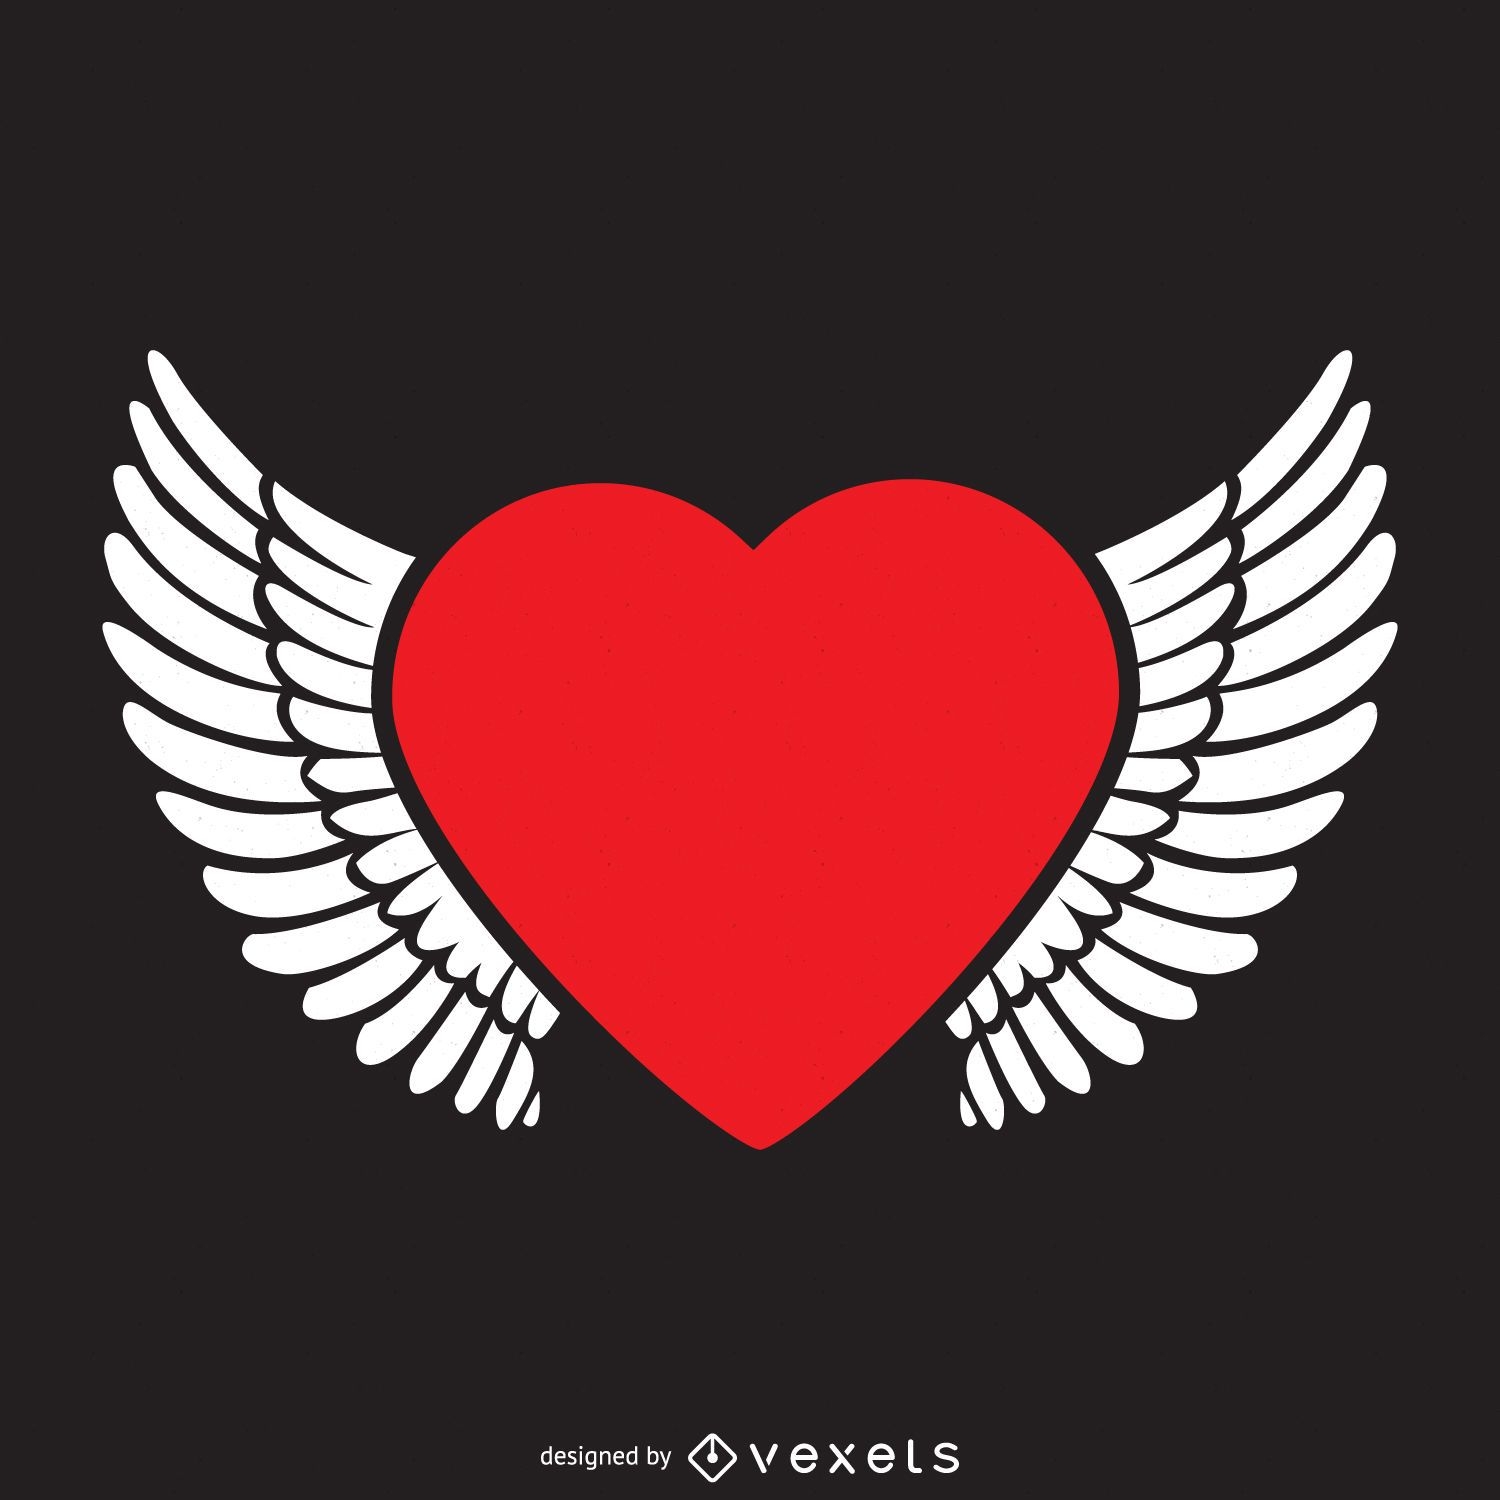 Heart with wings logo template Vector download